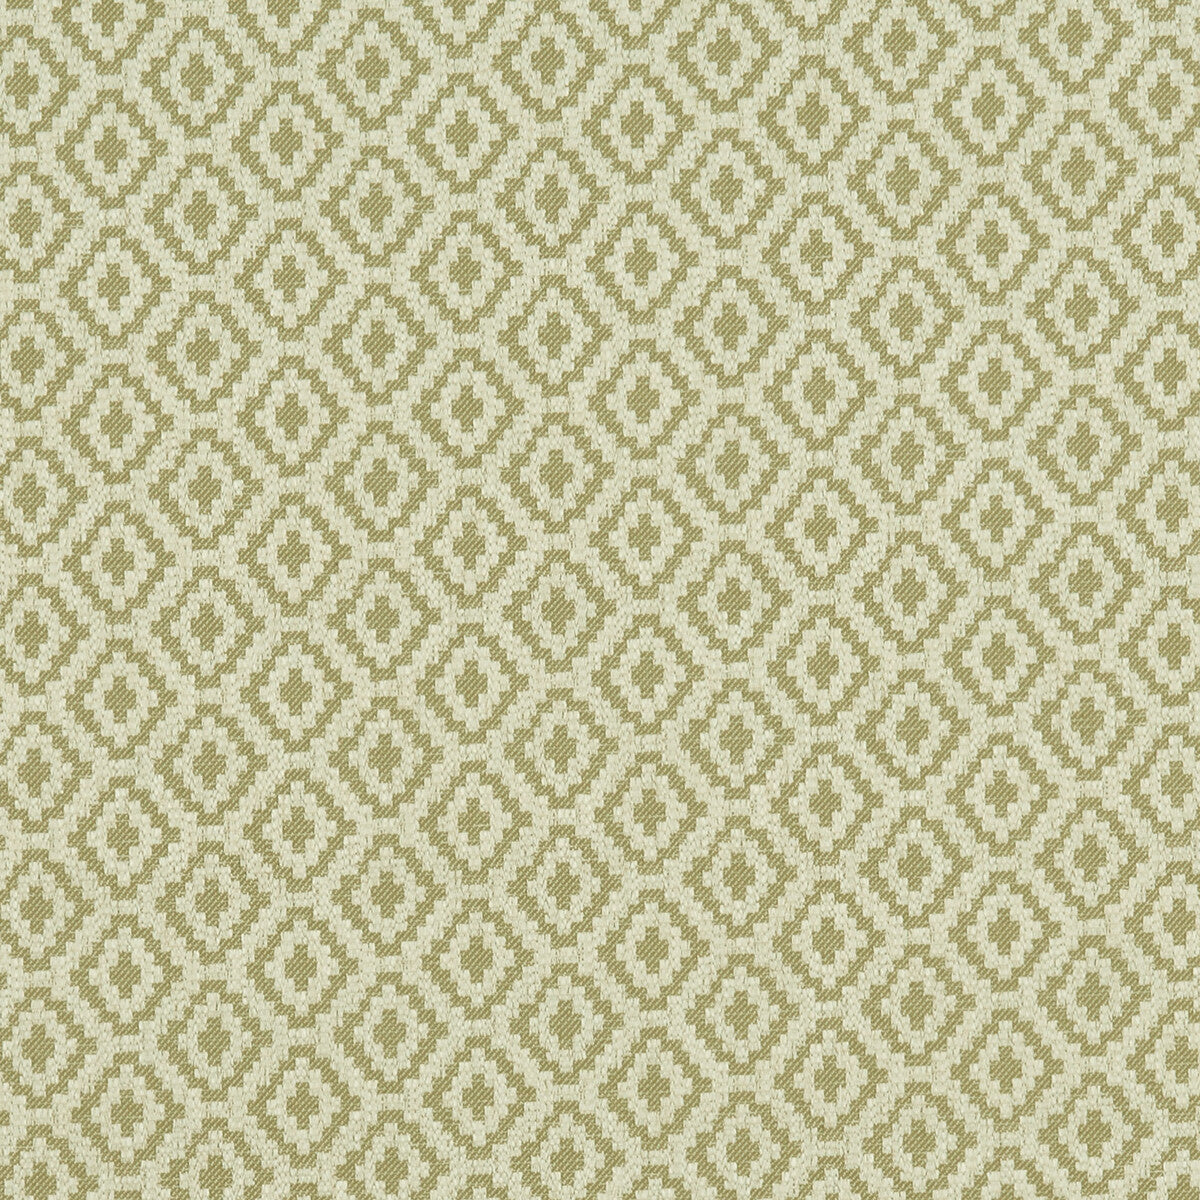 Keaton fabric in olive color - pattern F1045/04.CAC.0 - by Clarke And Clarke in the Clarke &amp; Clarke Castle Garden collection